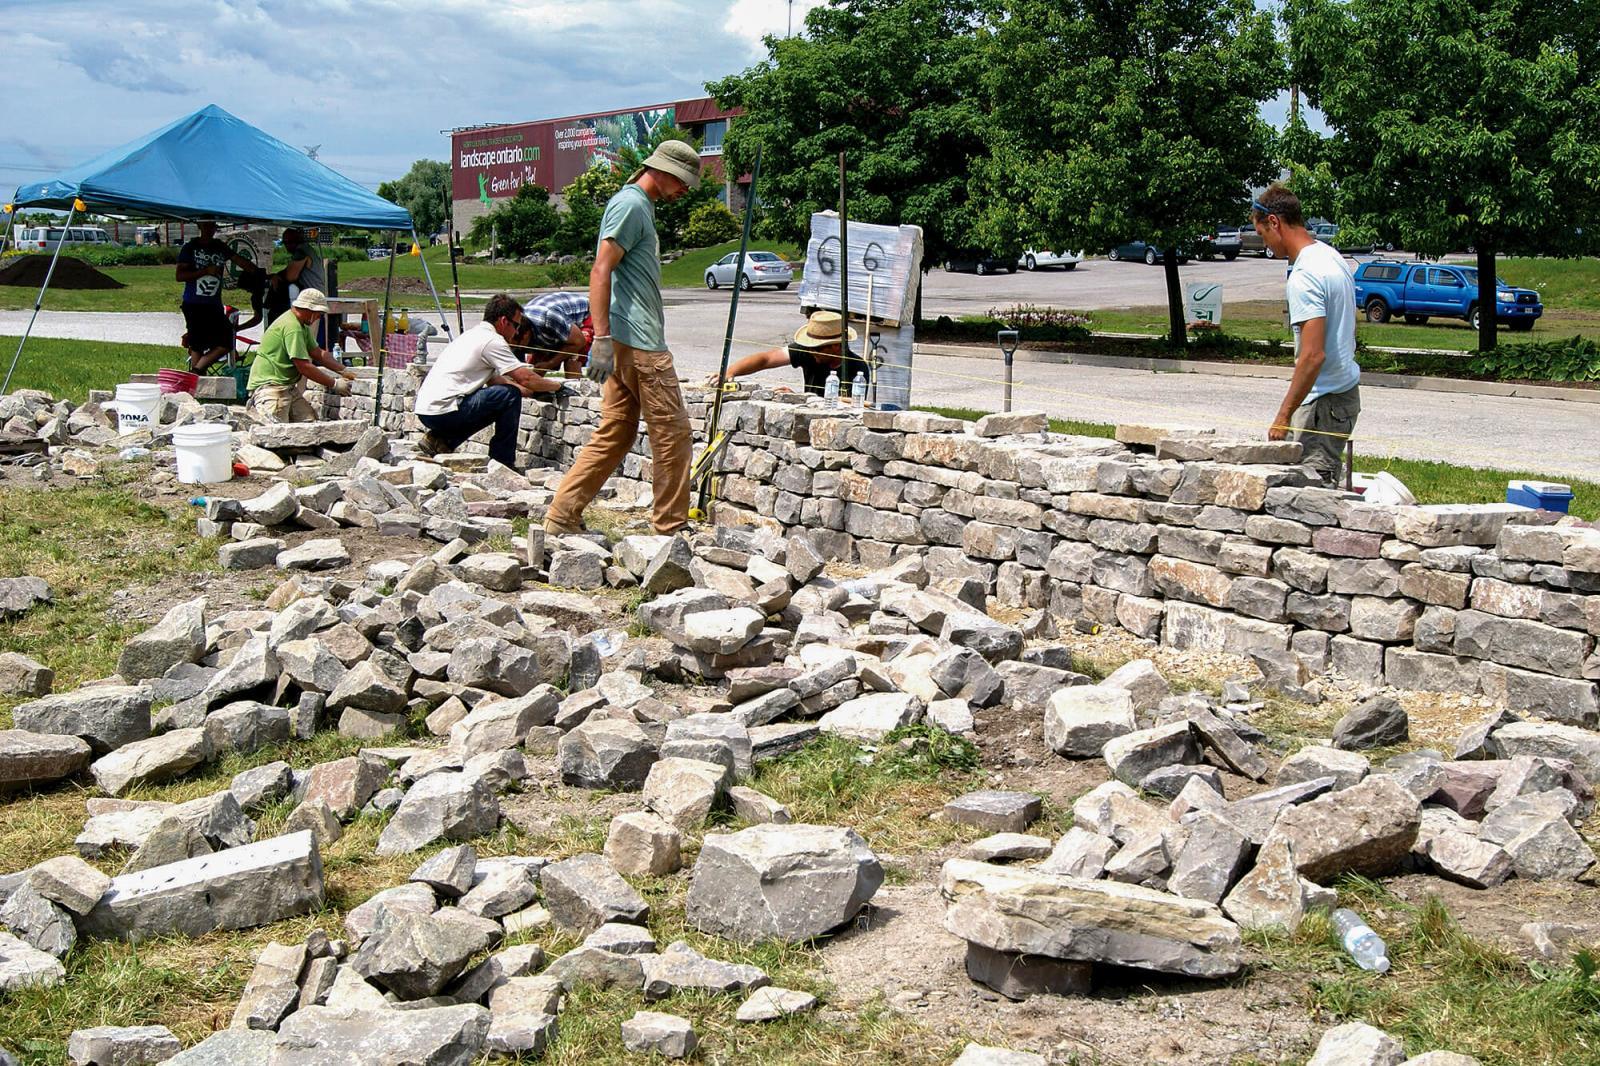 The first dry stone course at Landscape Ontario home office in Milton drew ten people. In photo students test themselves on the wall, which they had built the previous day in the instructional part of the course, only to tear it down the next day and build it again to be tested on what they had learned.